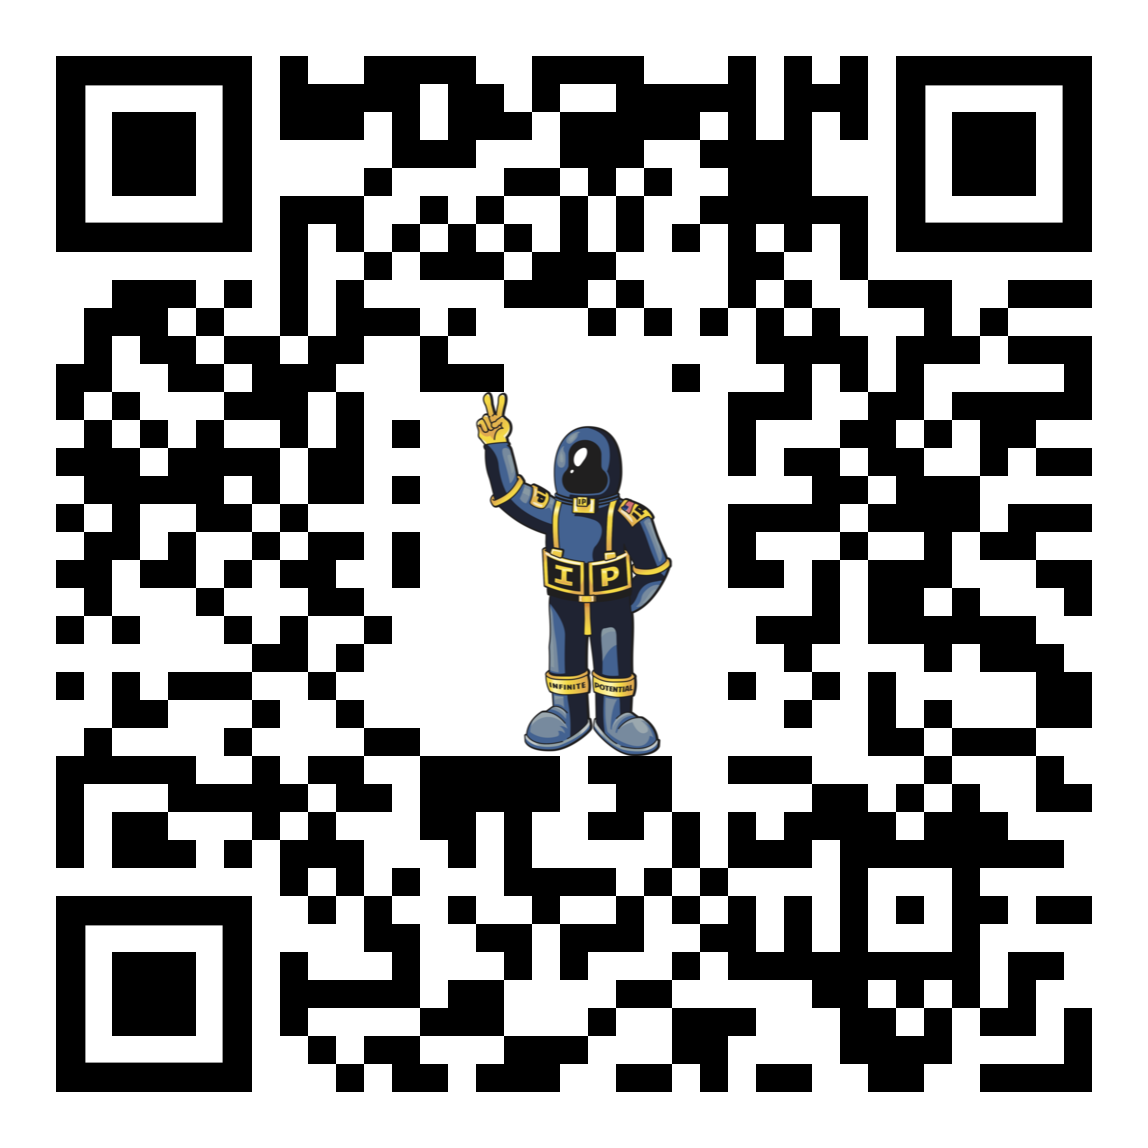 Scan here and enjoy the holidays!